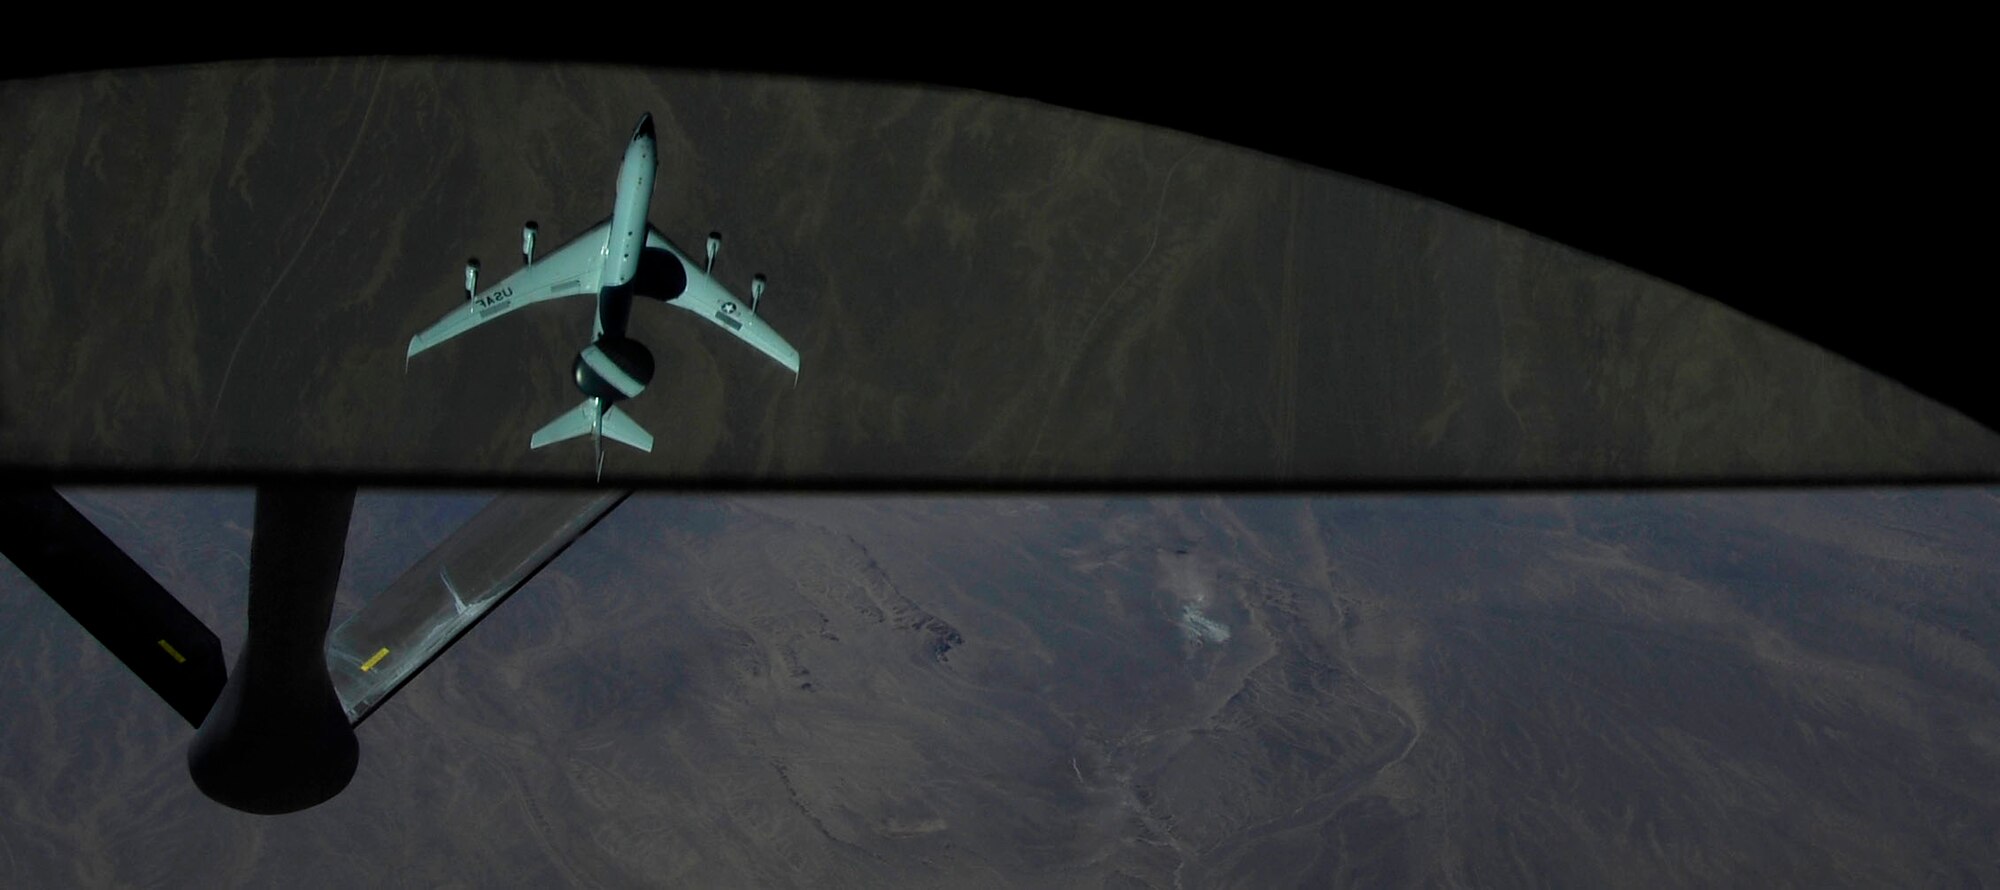 U.S. Air Force Airmen from the 340th Expeditionary Air Refueling Squadron,  refuel an E-3 Sentry, Airborne Warning and Control System (AWACS) aircraft, Jan.15, 2010, over Afghanistan.  The AWACS is an airborne radar system designed to detect and manage aircraft. The weapon system is used at high altitude and can distinguish between friendly and hostile aircraft from hundreds miles away. (U.S. Air Force photo/ SSgt Angelita Lawrence/released)